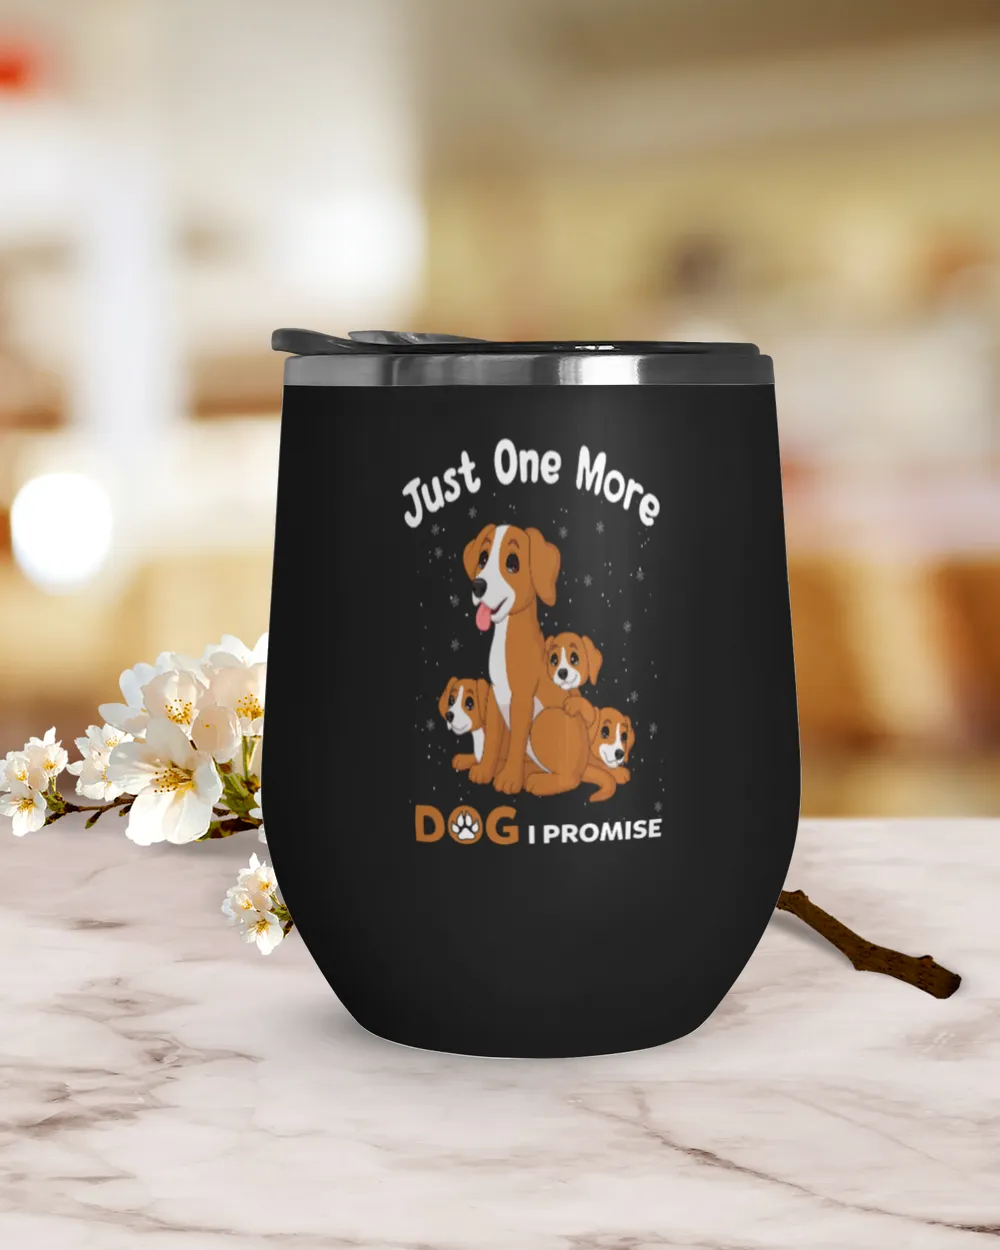 Just One More Dog I Promise Personalized Grandpa Grandma Mom Sister For Dog Lovers